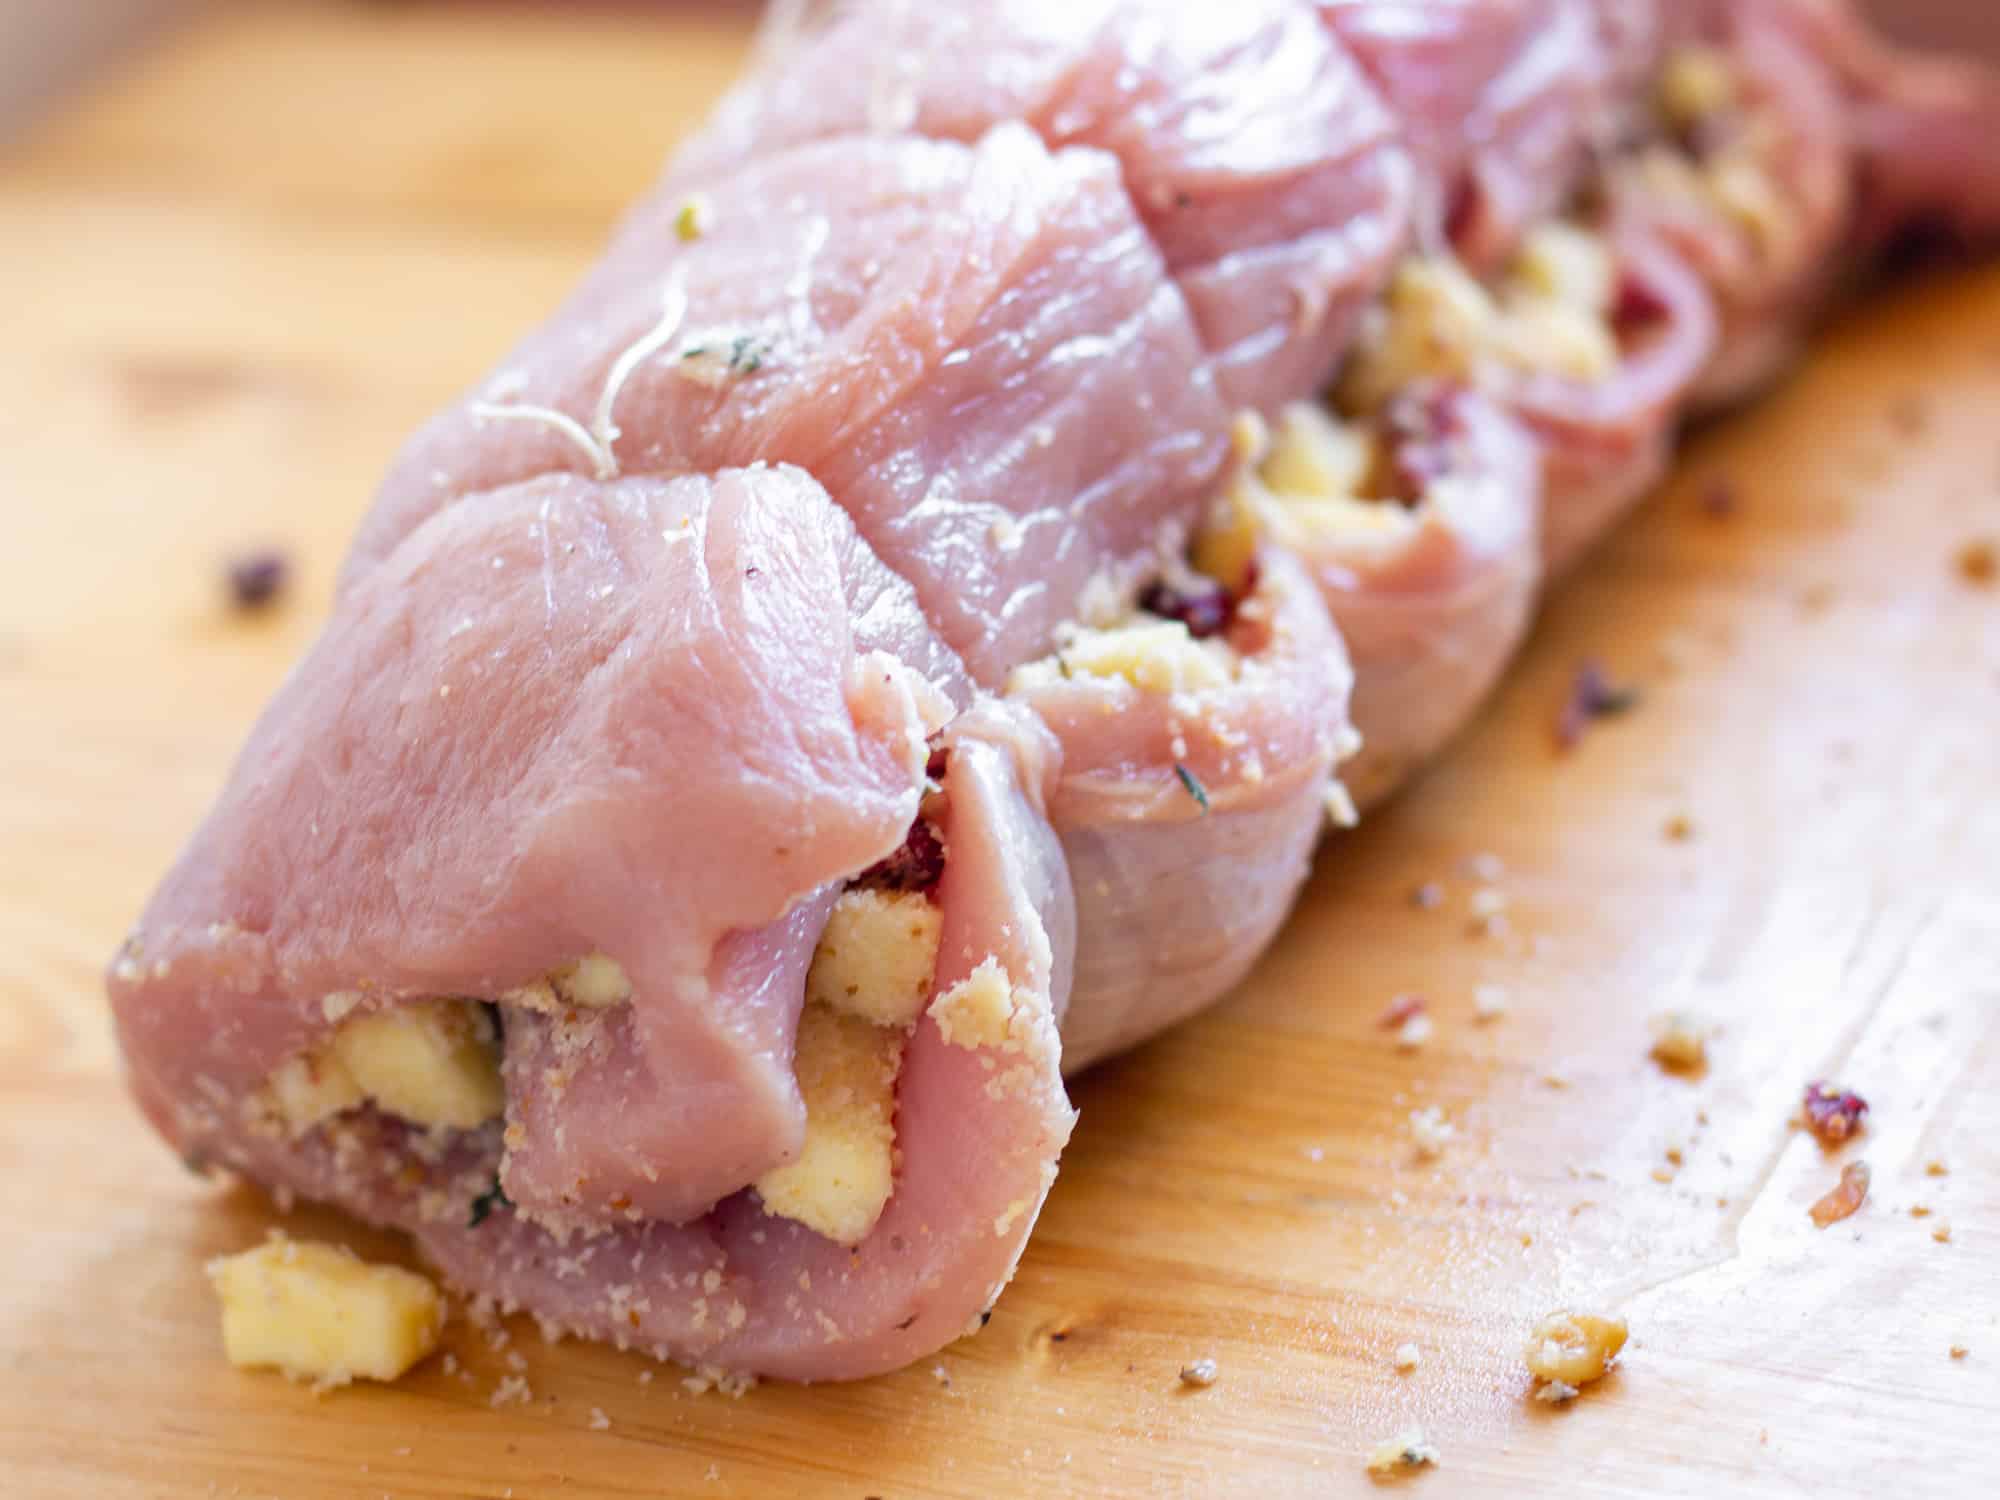 Tie up the rolled pork loin with kitchen twine.